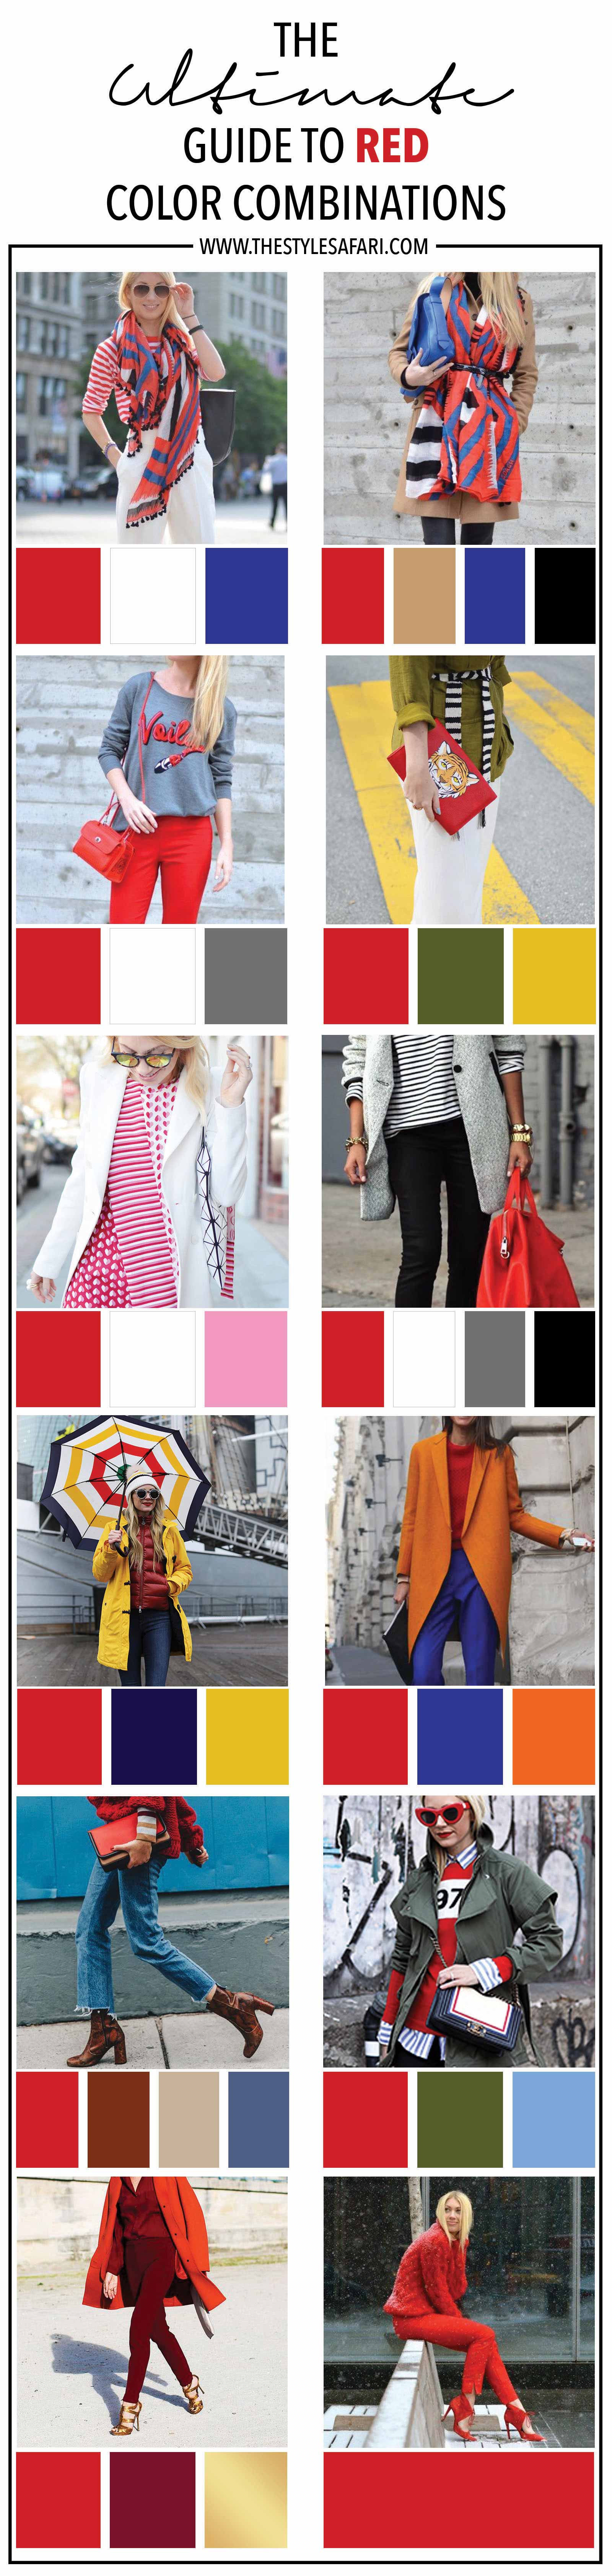 Styling Tips, The Ultimate Guide to Red Color Combination, red outfit combos